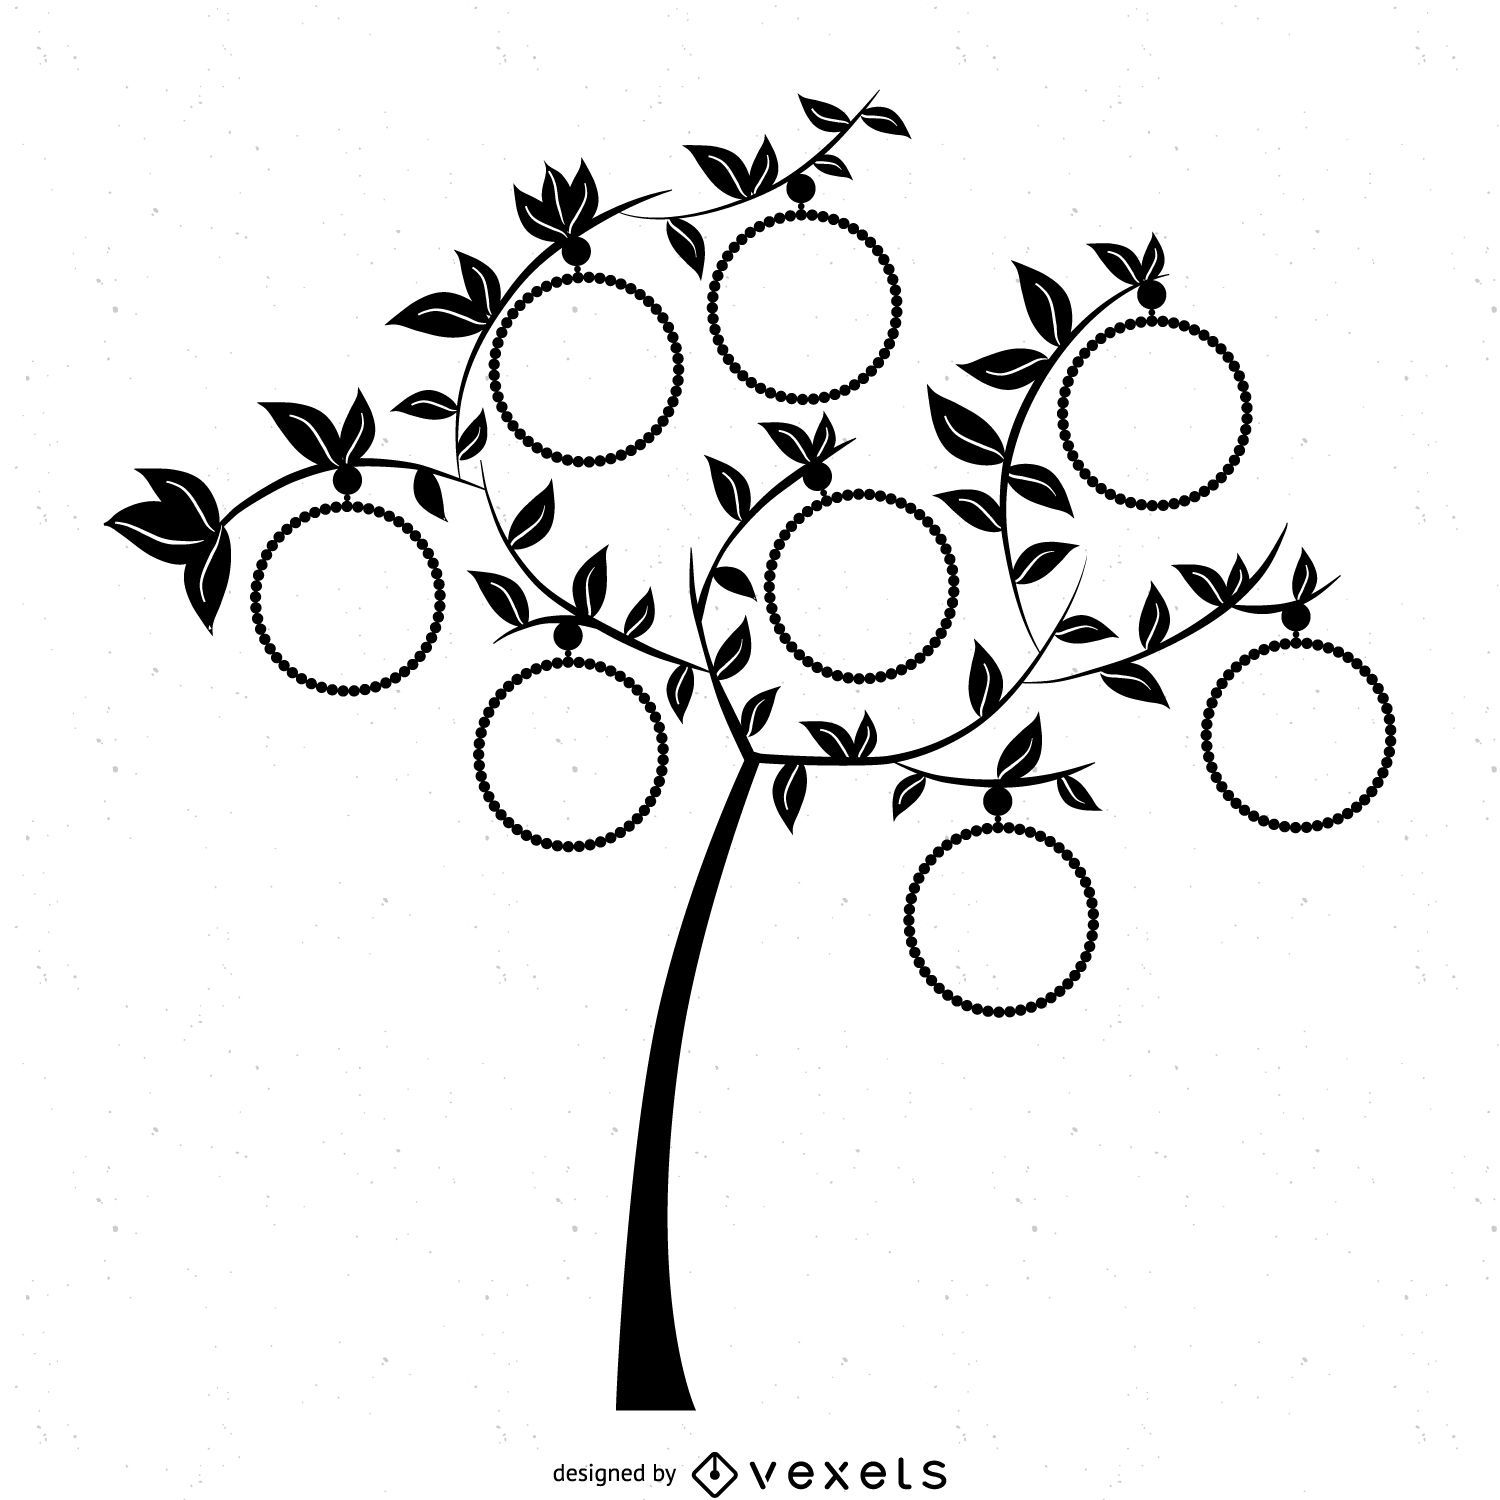 black and white family tree template